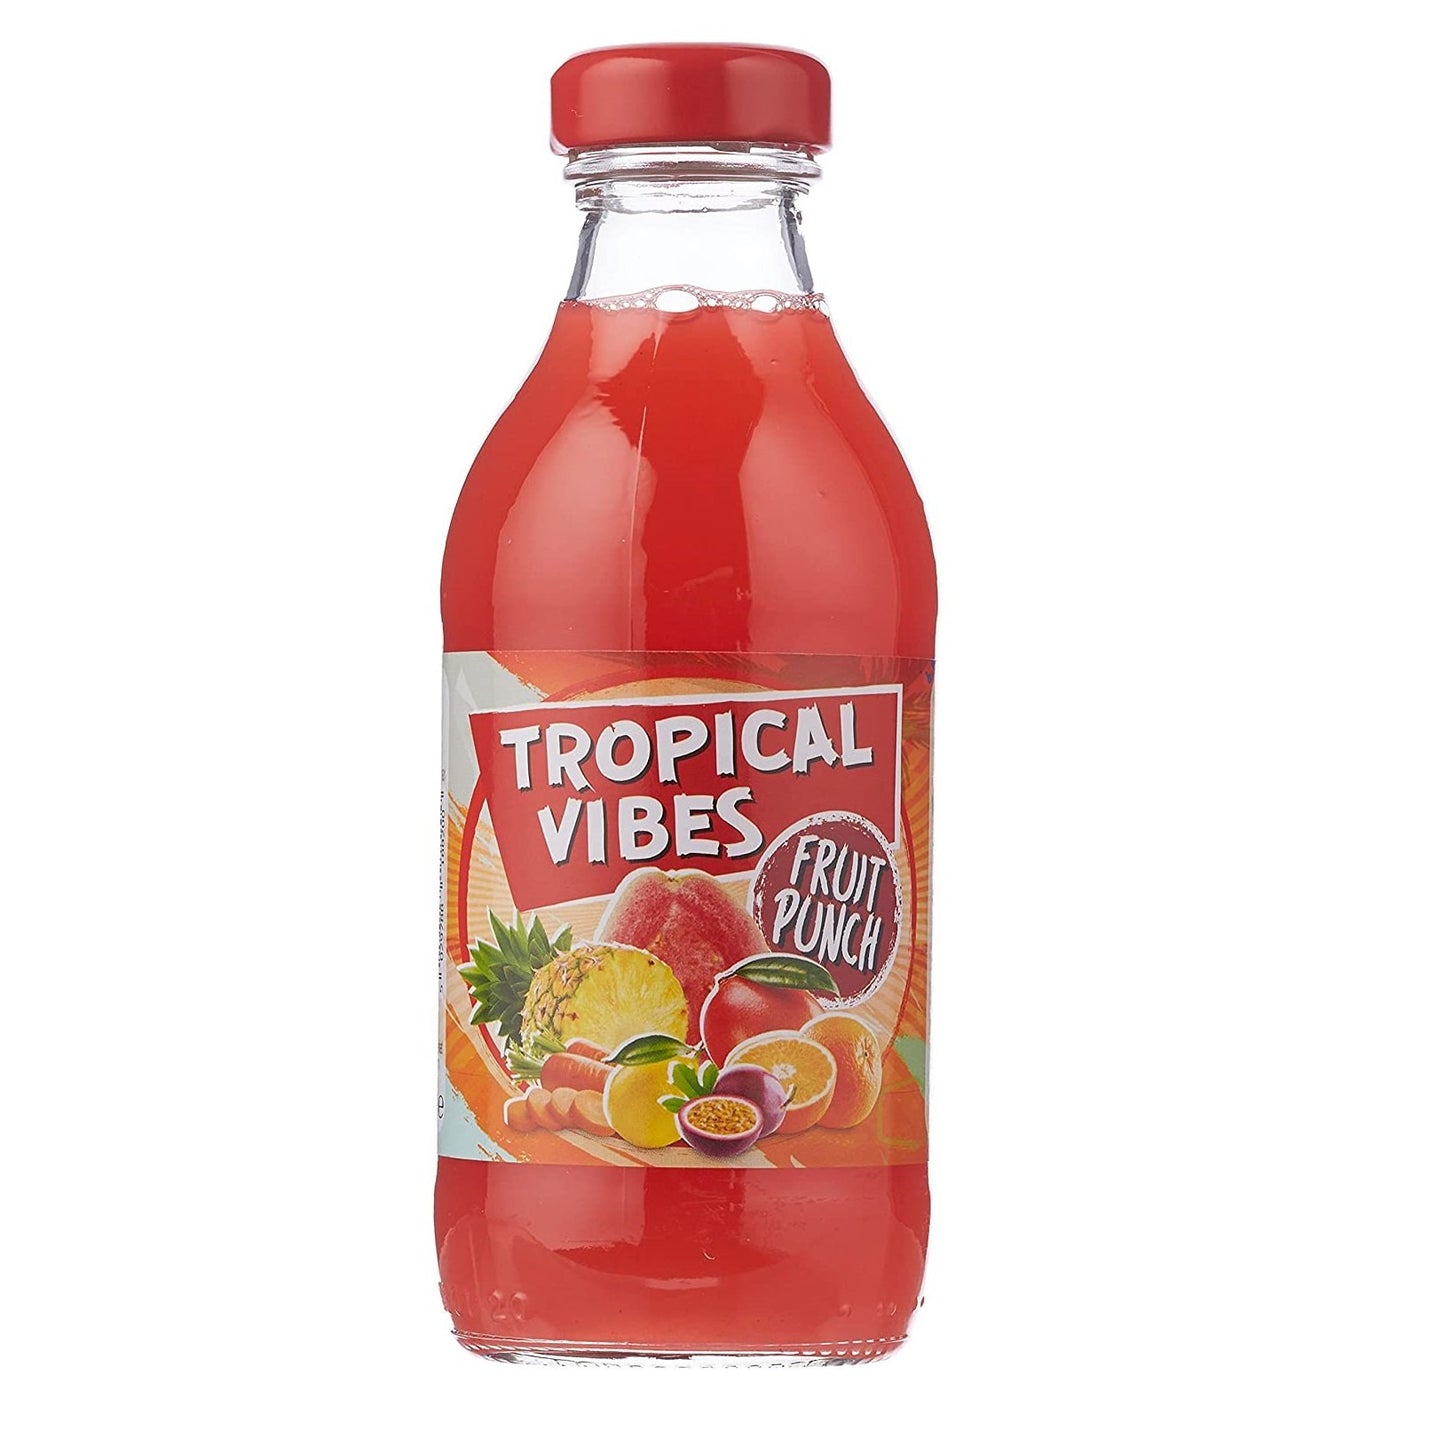 Tropical Vibes Fruit Punch 300ml Case of 15